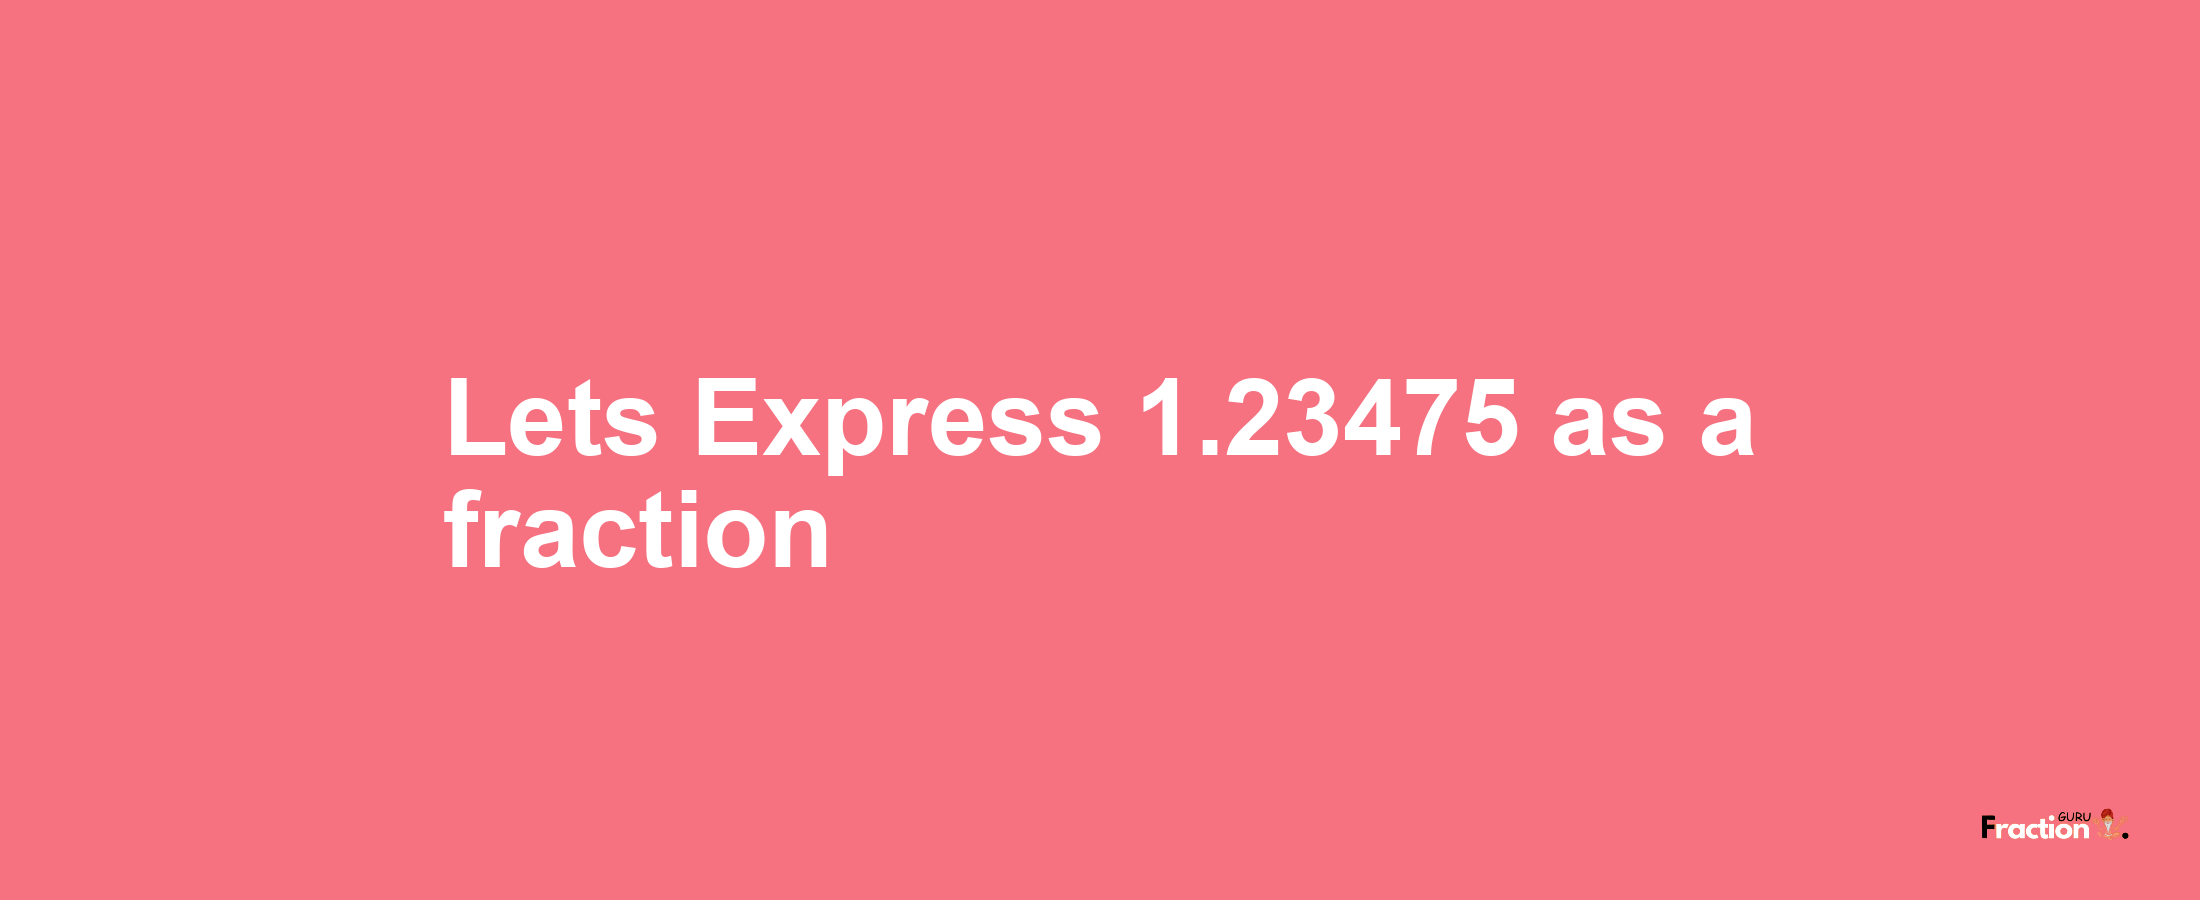 Lets Express 1.23475 as afraction